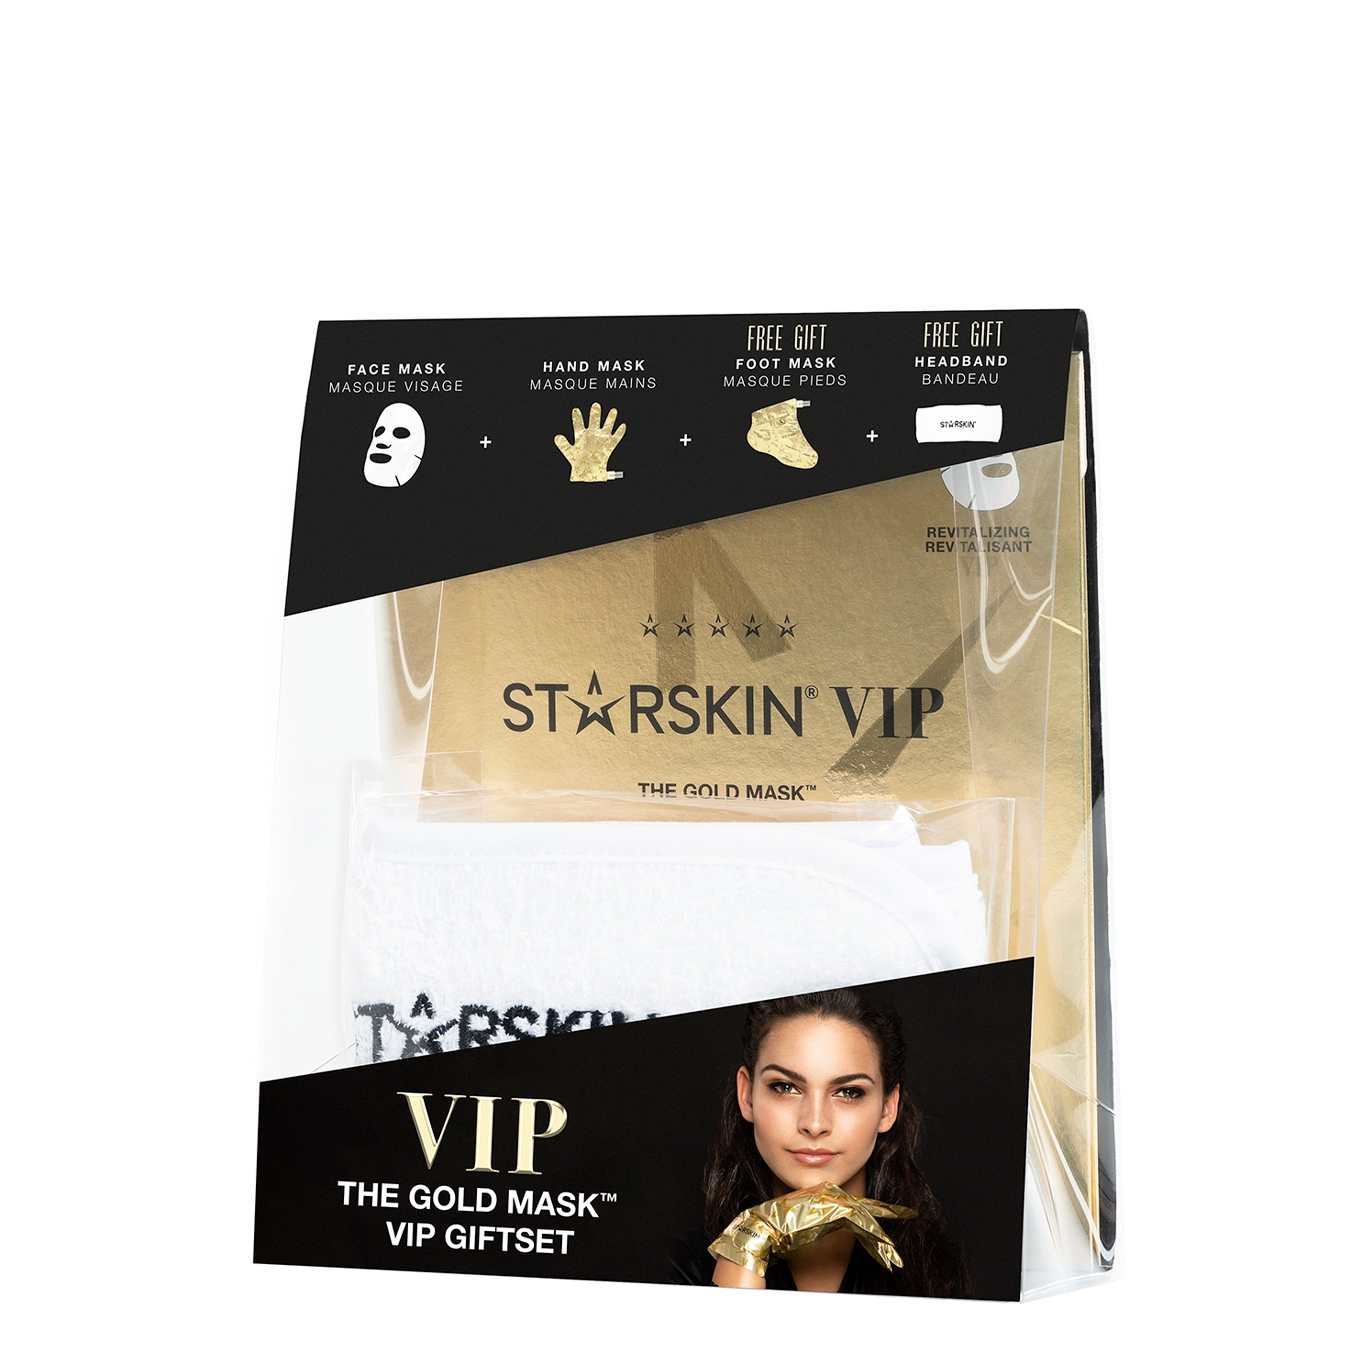 Vip The Gold Mask Giftset